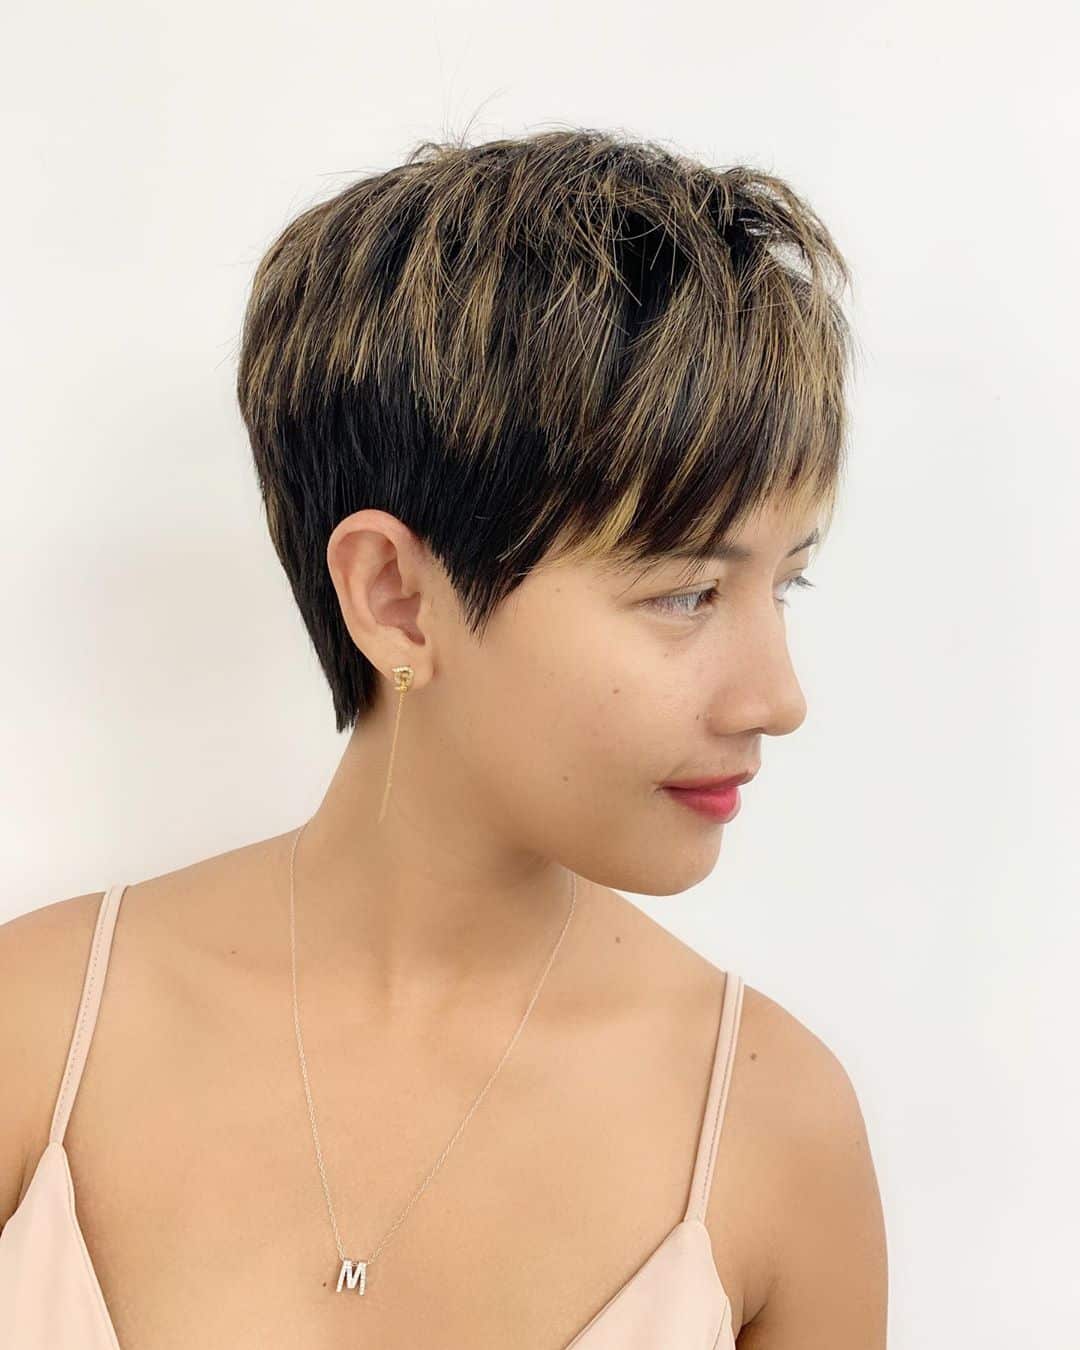 15 Short Haircuts For Asian Girls You Gotta See